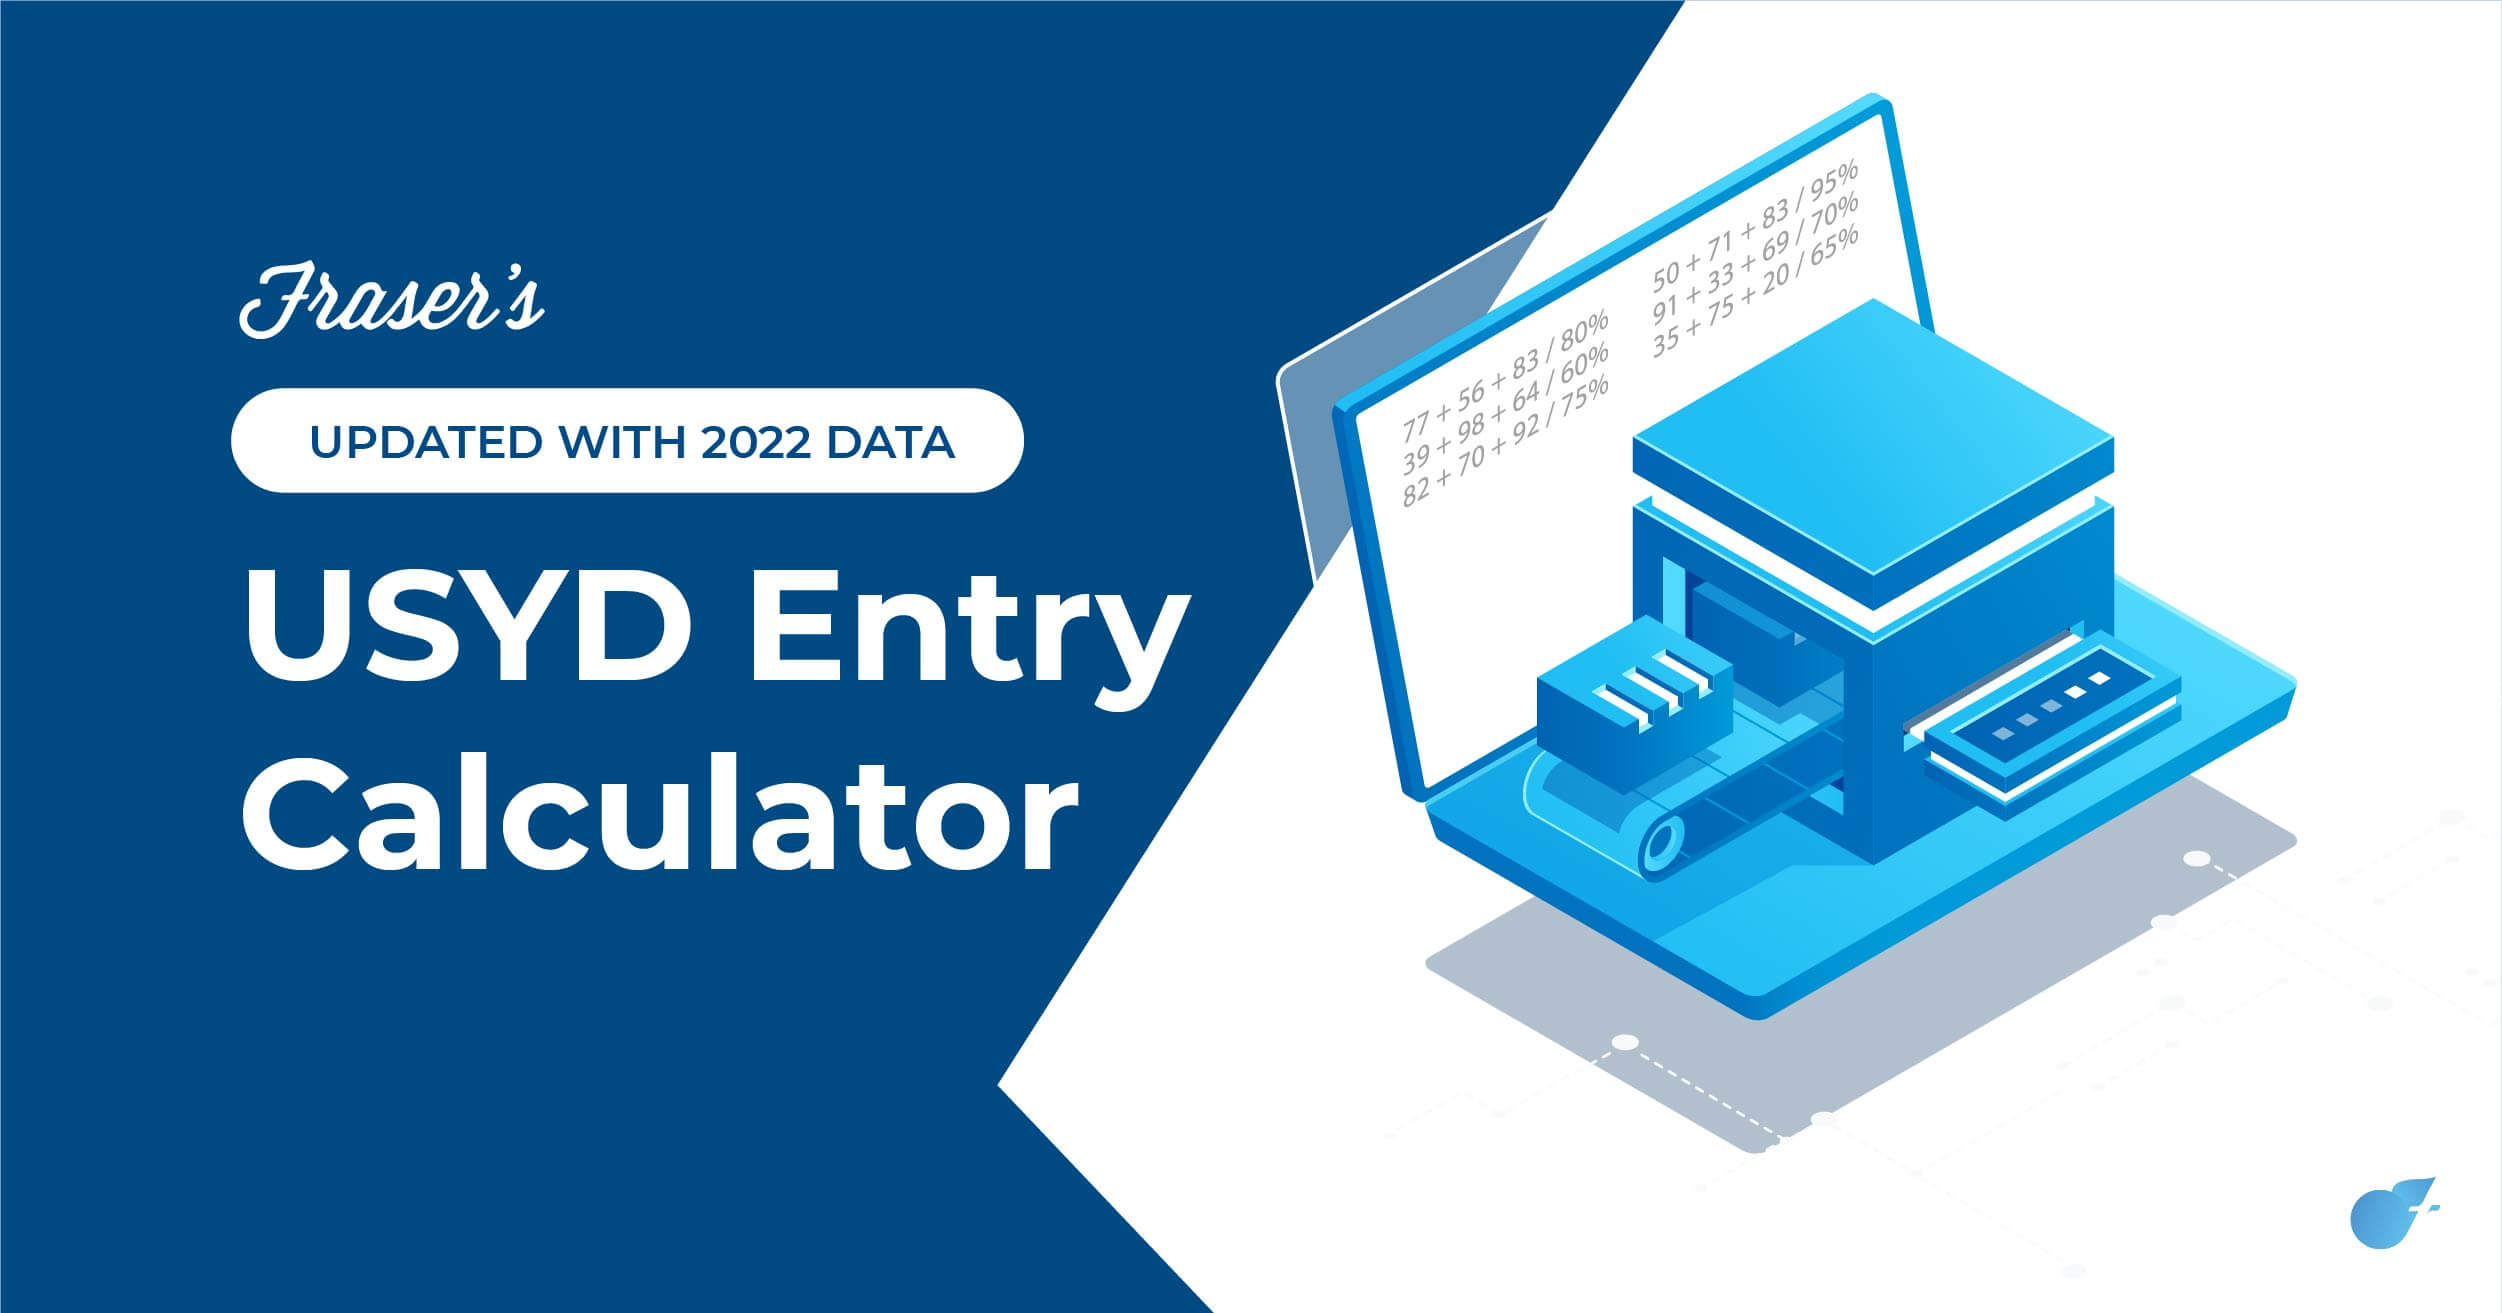 USyd Entry Calculator featured image